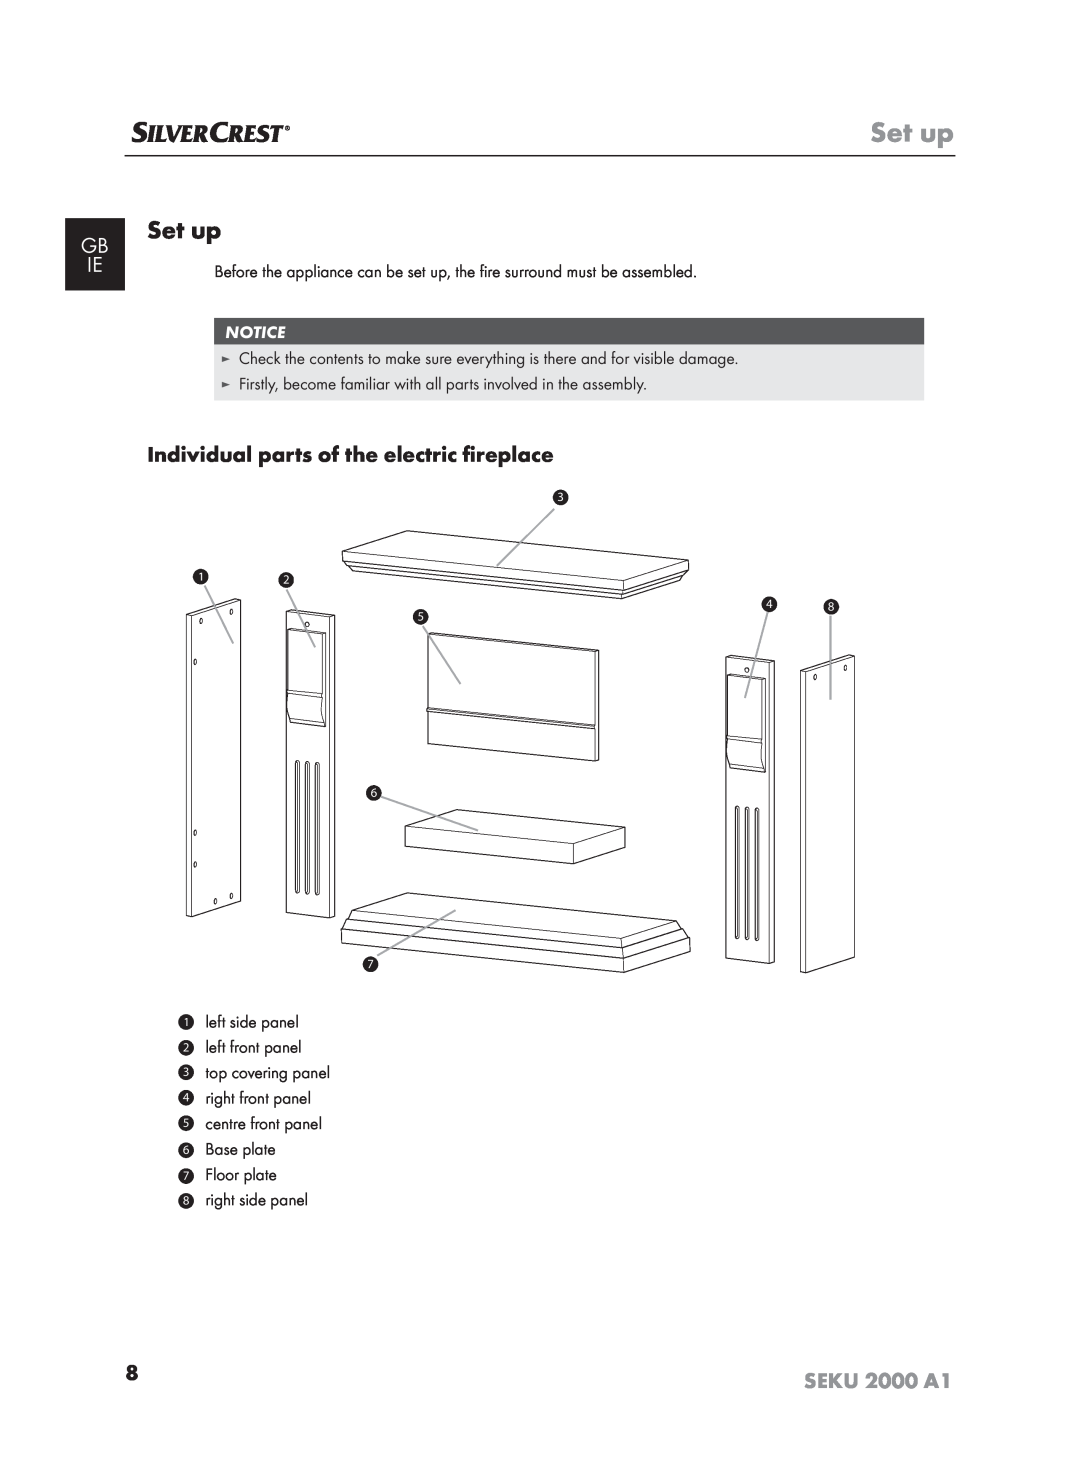 Silvercrest SEKU 2000 A16 operating instructions Set up, Individual parts of the electric ﬁreplace, Gb Ie 